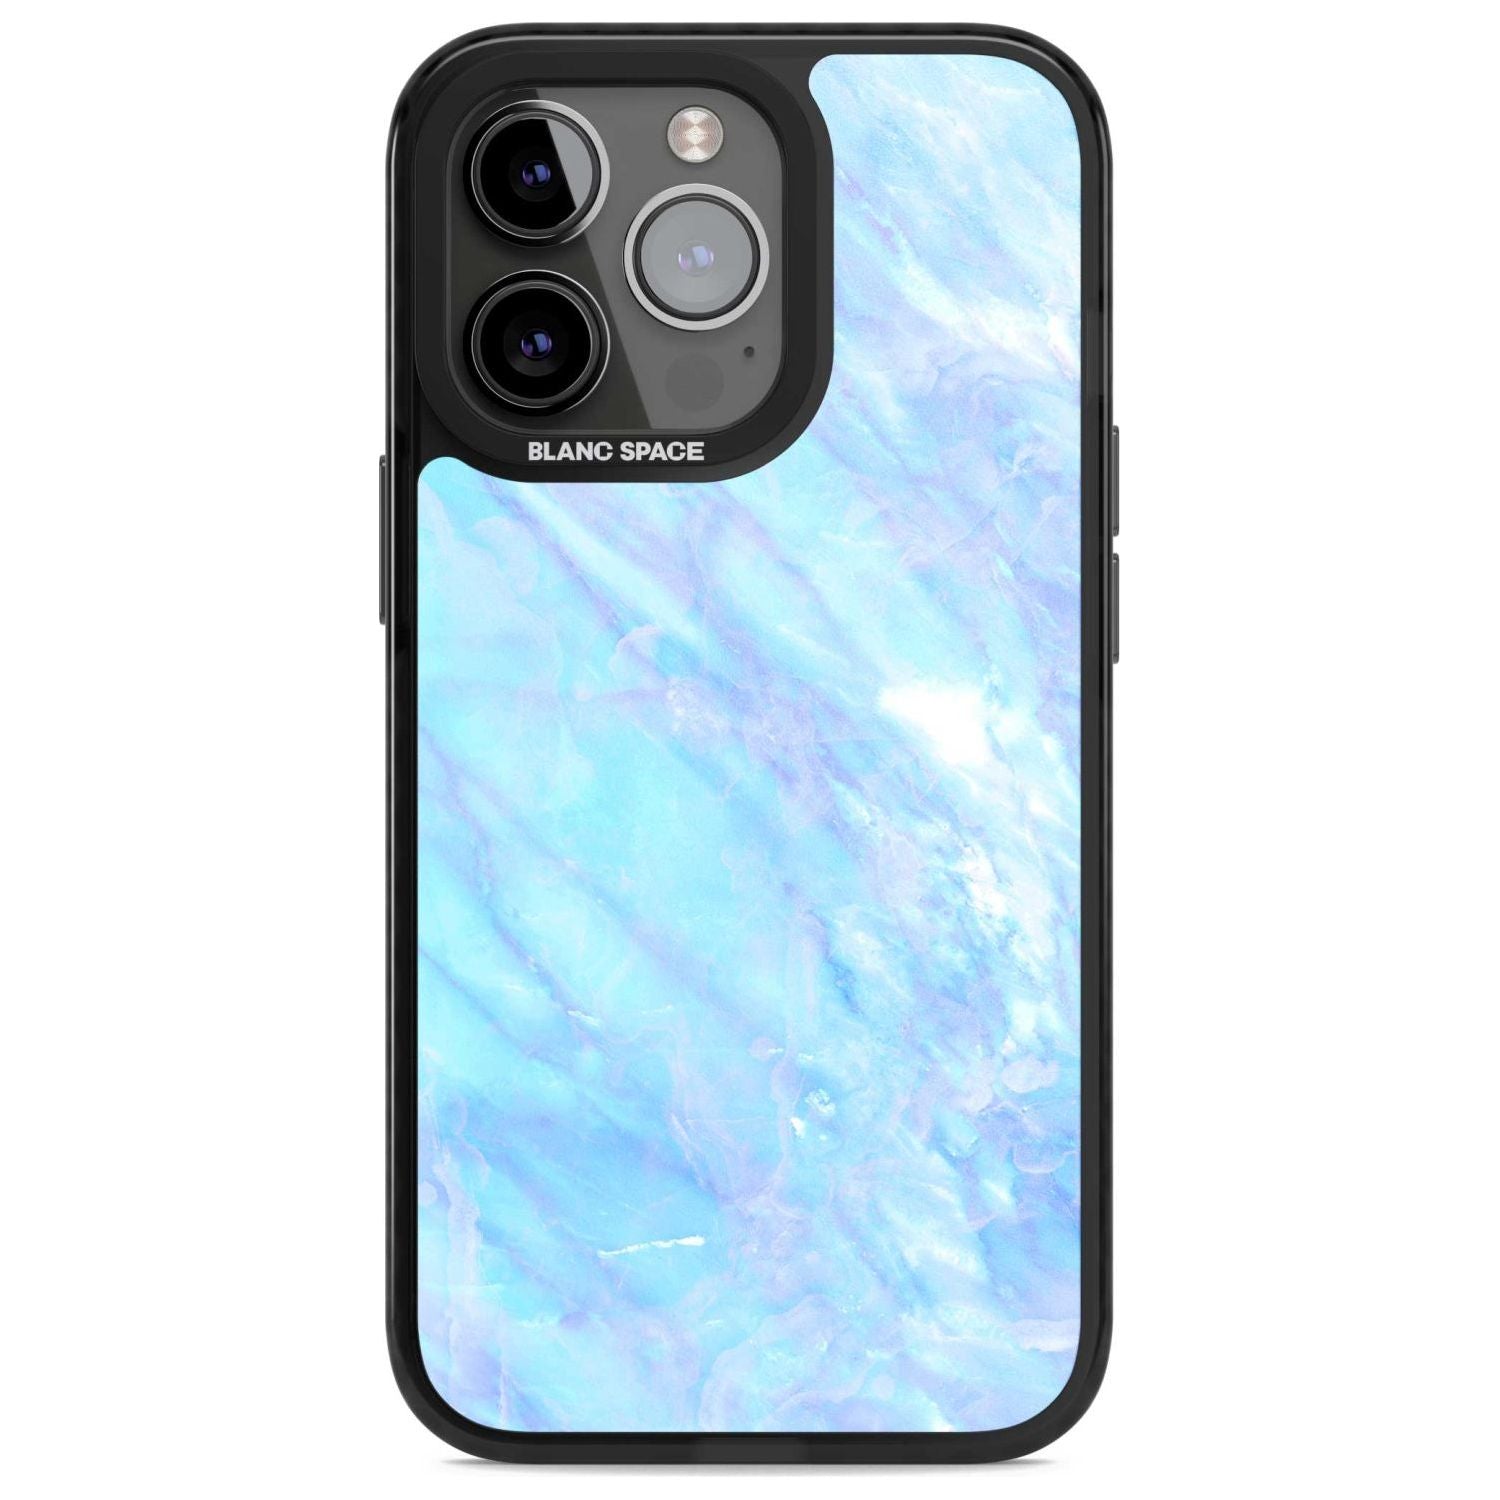 Iridescent Crystal Marble Phone Case iPhone 15 Pro Max / Magsafe Black Impact Case,iPhone 15 Pro / Magsafe Black Impact Case,iPhone 14 Pro Max / Magsafe Black Impact Case,iPhone 14 Pro / Magsafe Black Impact Case,iPhone 13 Pro / Magsafe Black Impact Case Blanc Space